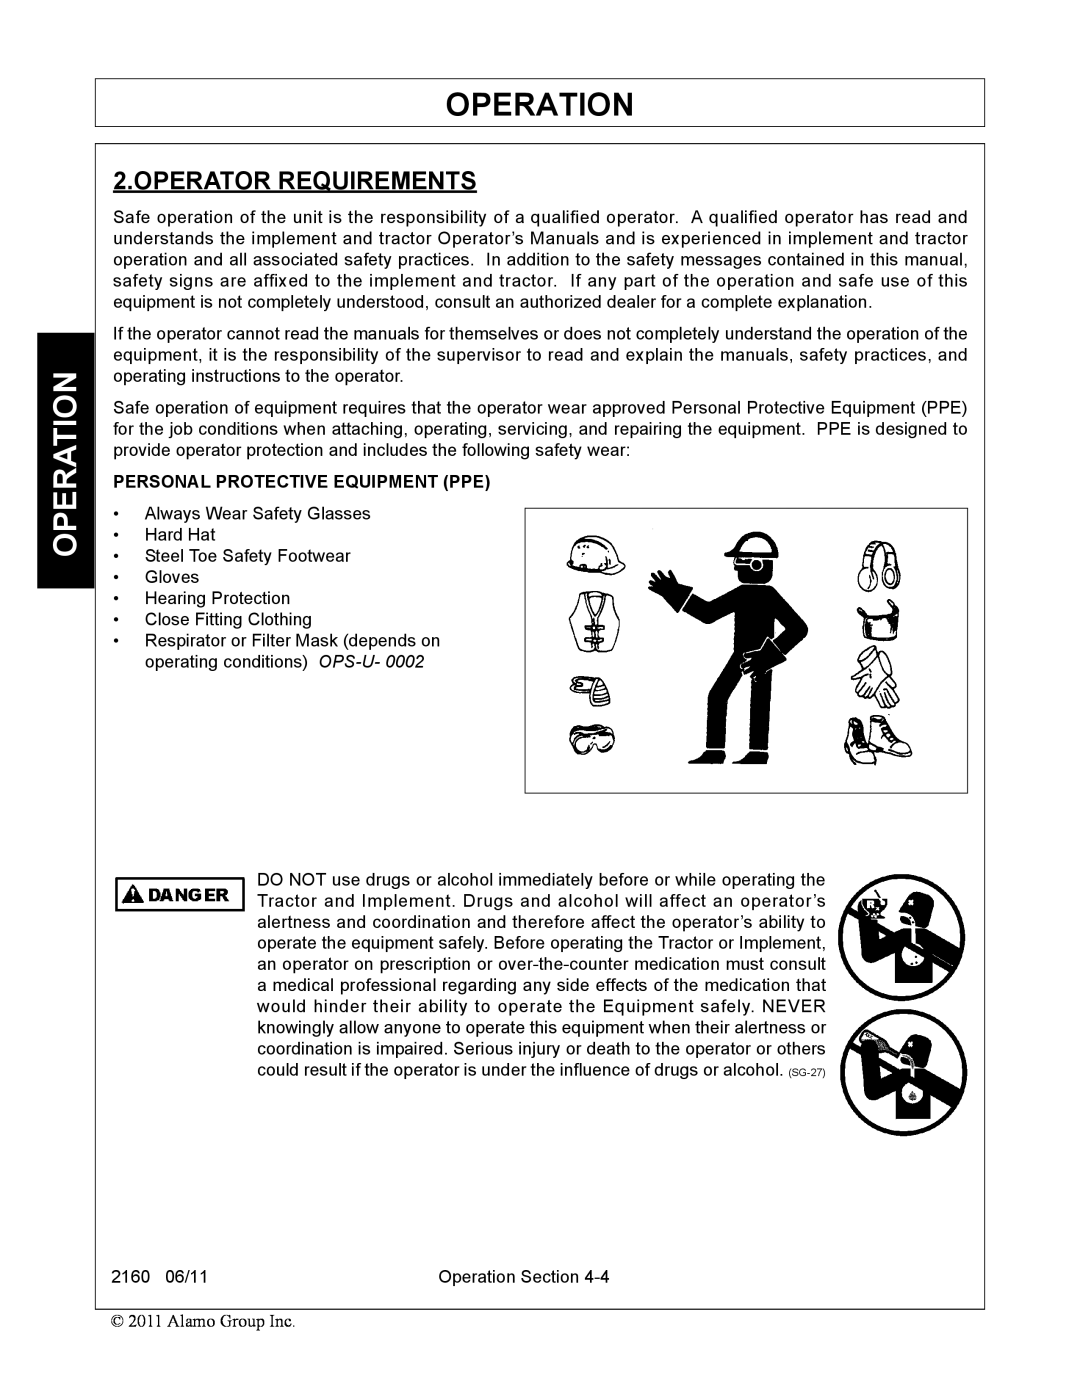 Servis-Rhino 2160 manual Operator Requirements, Operation, Personal Protective Equipment Ppe 